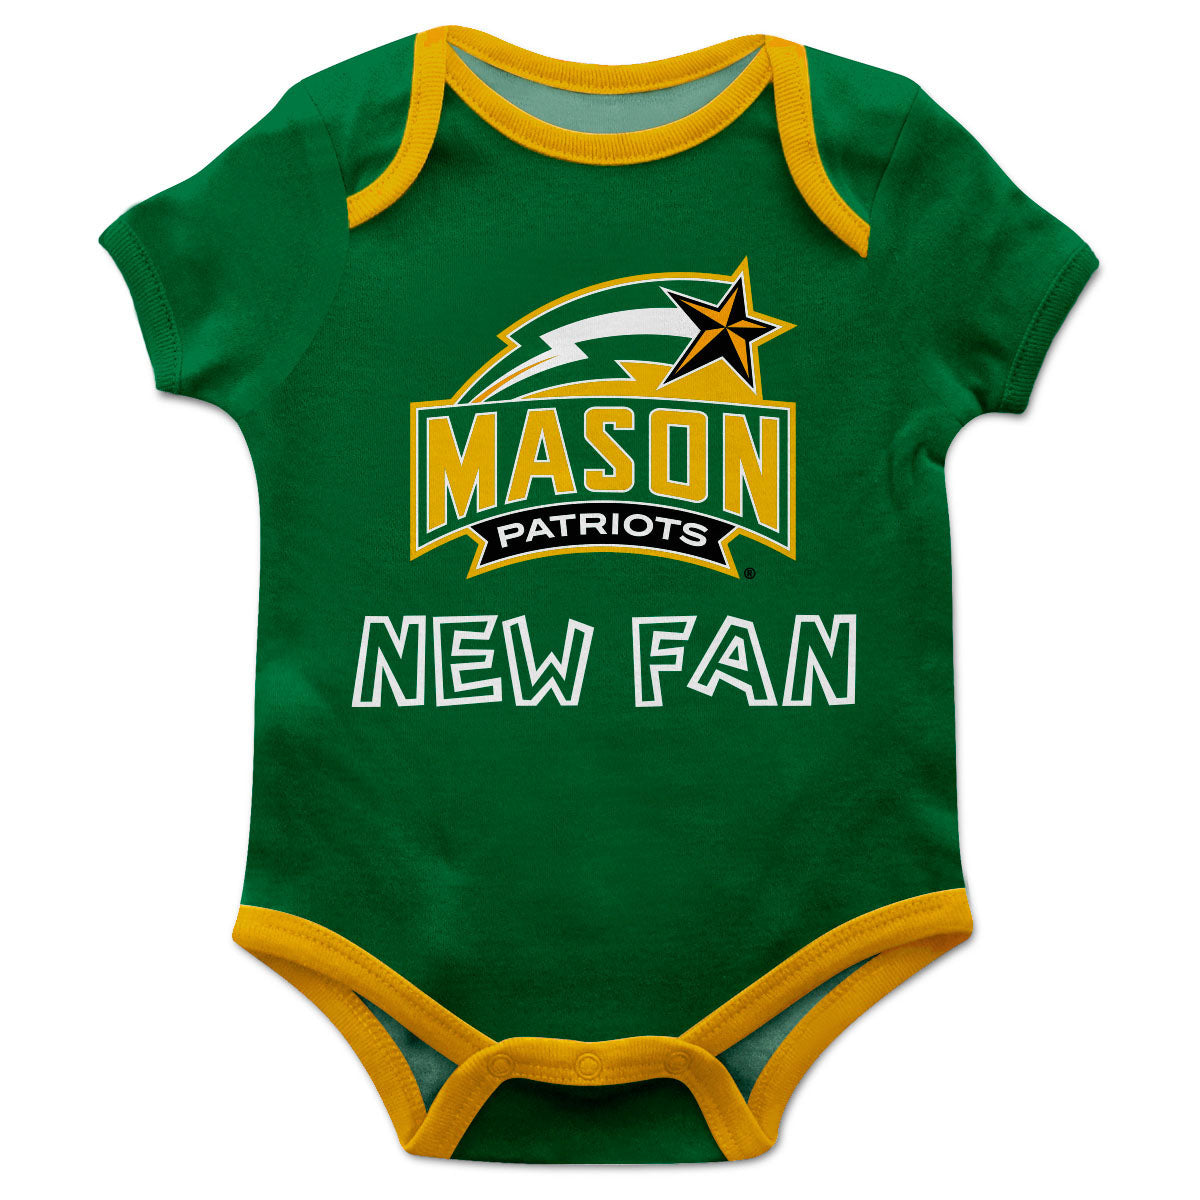 George Mason Patriots Infant Game Day Green Short Sleeve One Piece Jumpsuit New Fan Logo and Name Bodysuit by Vive La Fete